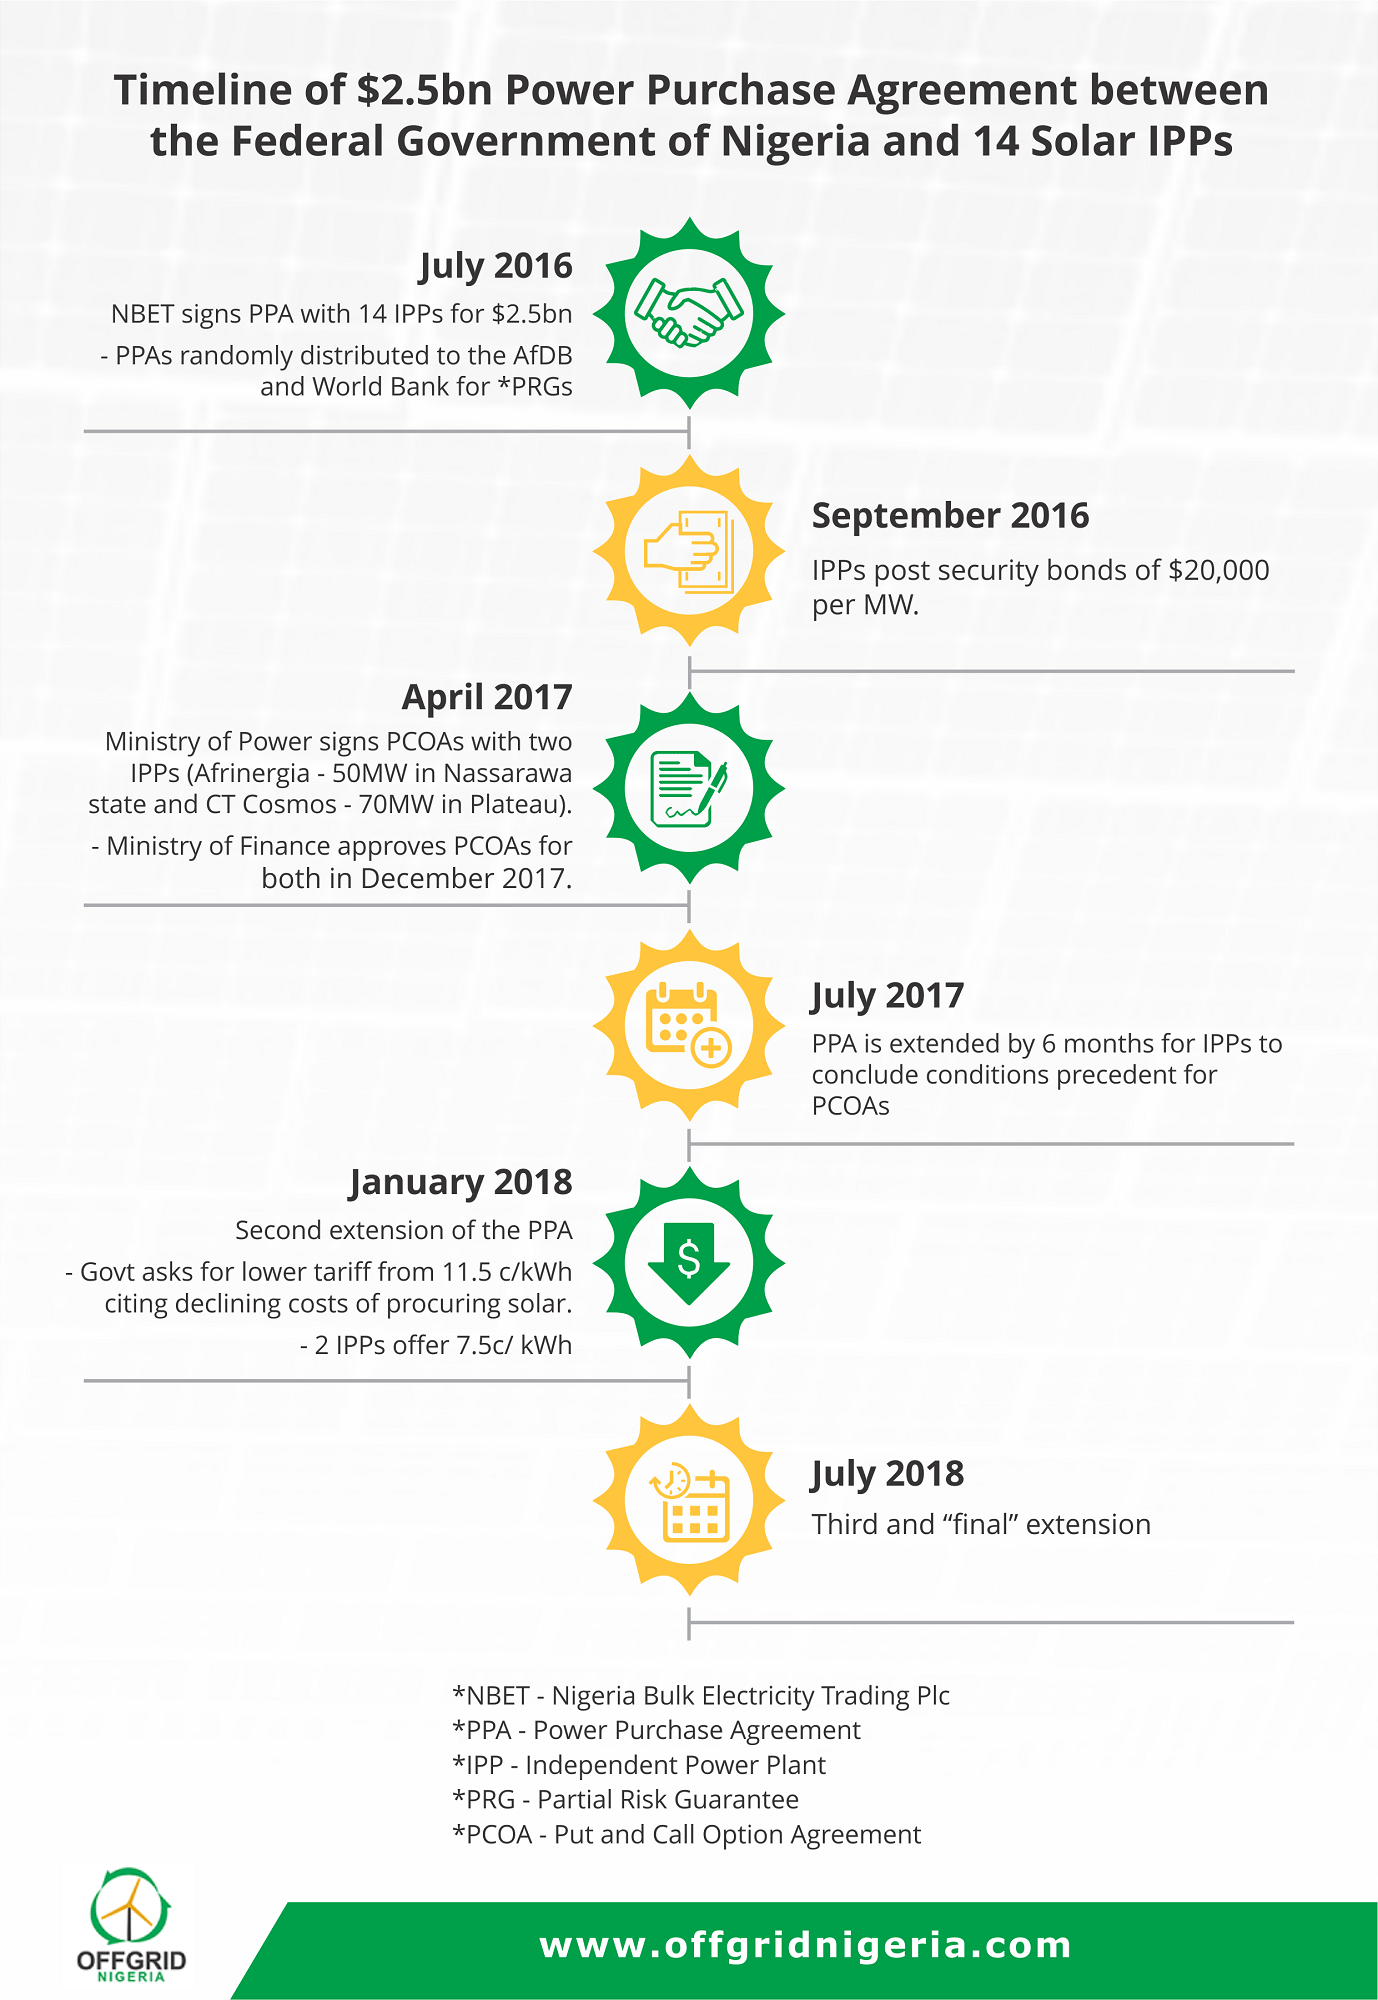 Timeline of PPA with 14 solar IPPs